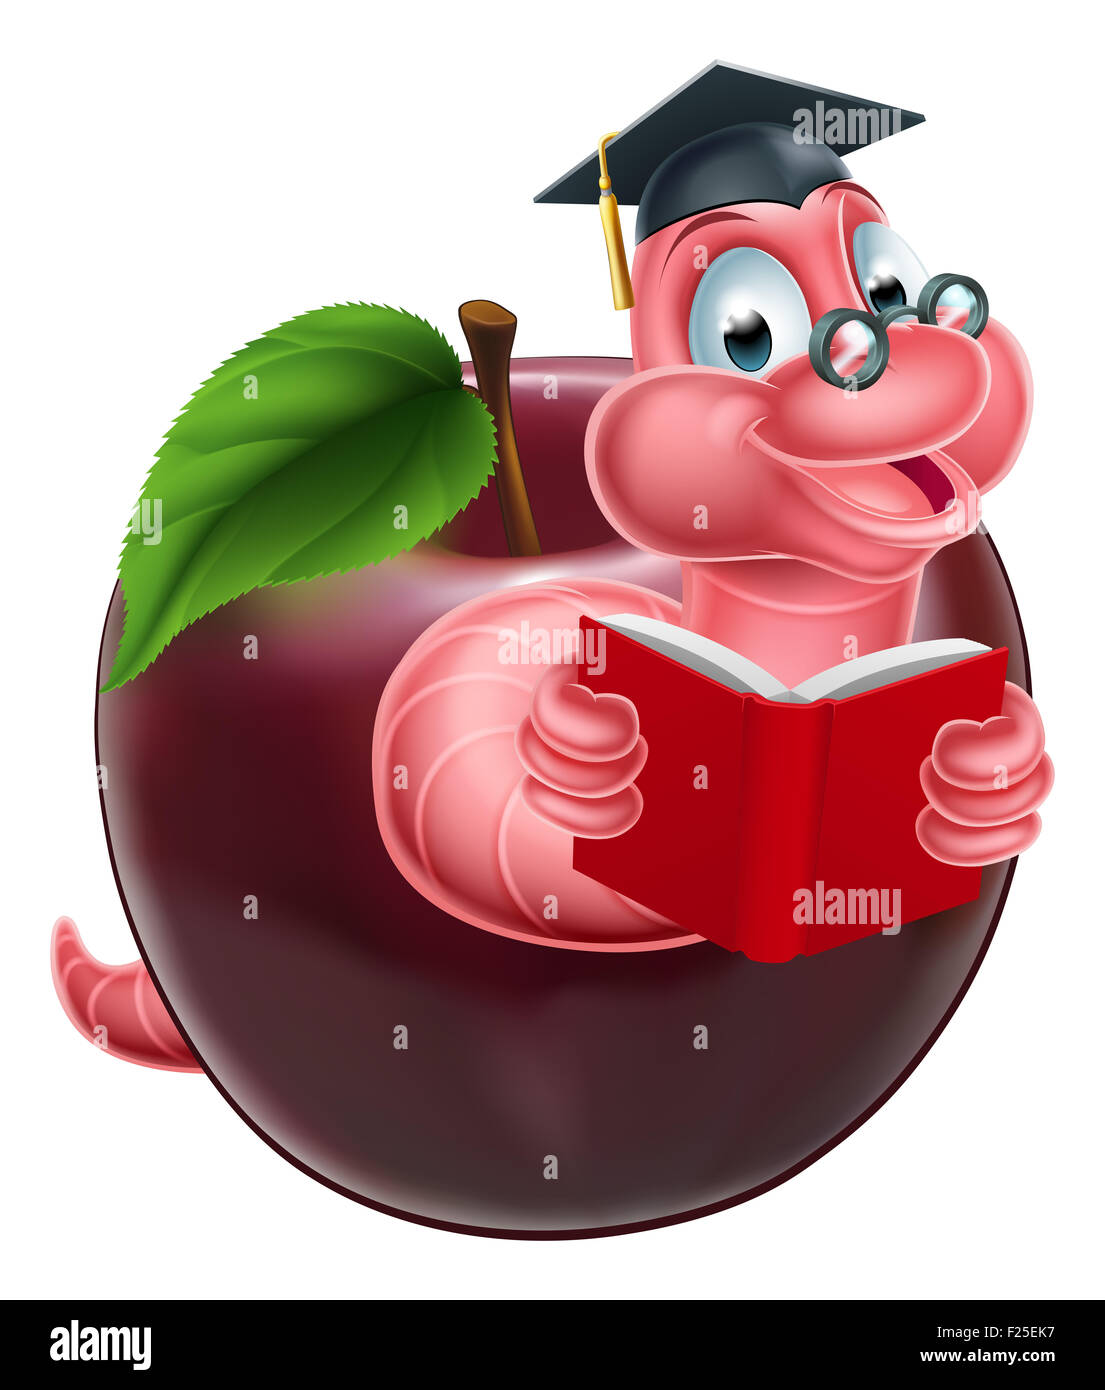 Cartoon caterpillar bookworm worm or caterpillar reading a book and coming out of an apple and wearing glasses and mortar board Stock Photo